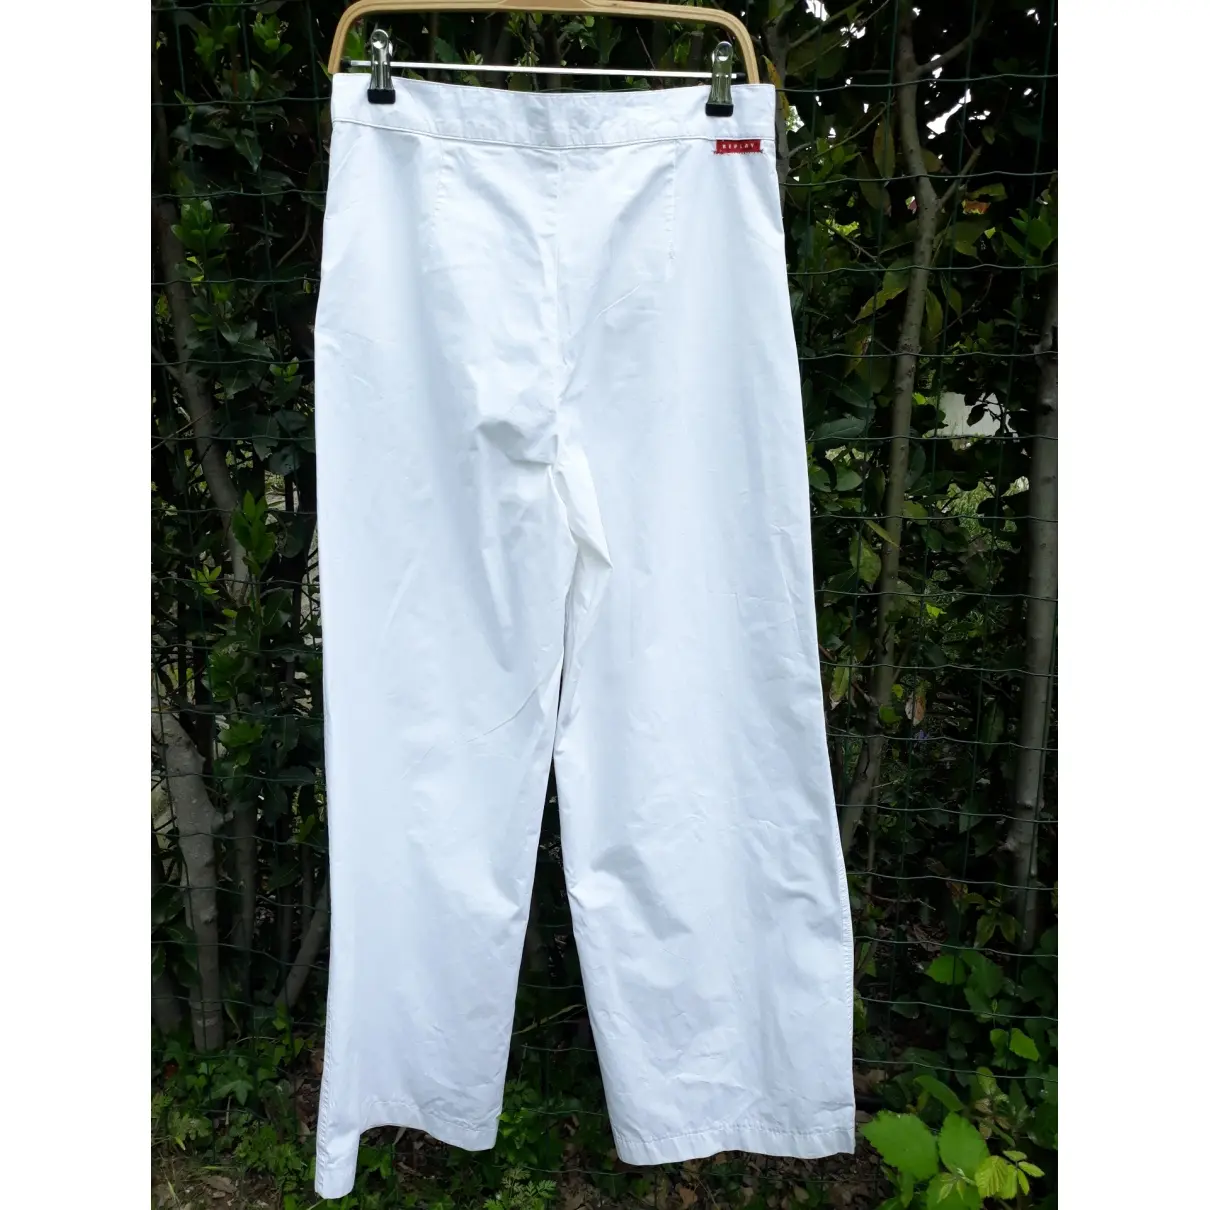 Replay Large pants for sale